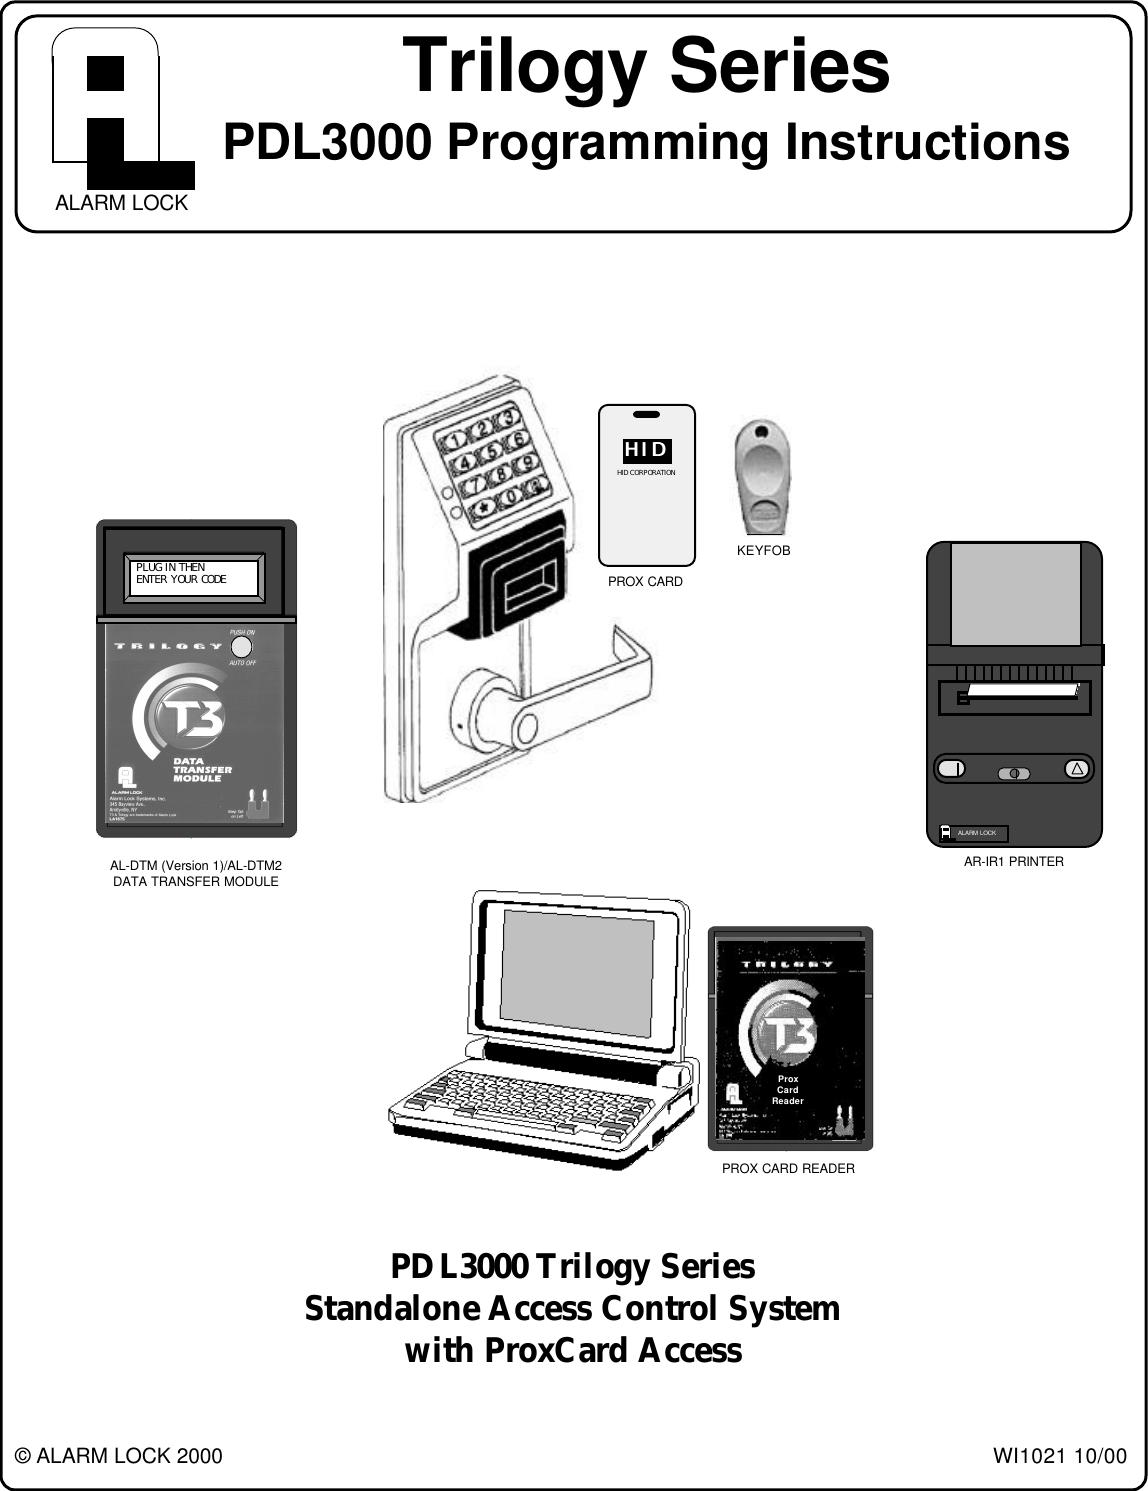 1Trilogy SeriesPDL3000 Programming InstructionsWI1021 10/00© ALARM LOCK 2000ALARM LOCKALARM LOCKPDL3000 Trilogy SeriesStandalone Access Control Systemwith ProxCard Access PLUG IN THEN ENTER YOUR CODEHIDHIDHID CORPORATIONProxCardReaderAL-DTM (Version 1)/AL-DTM2DATA TRANSFER MODULEPROX CARD READERAR-IR1 PRINTERPROX CARDKEYFOB